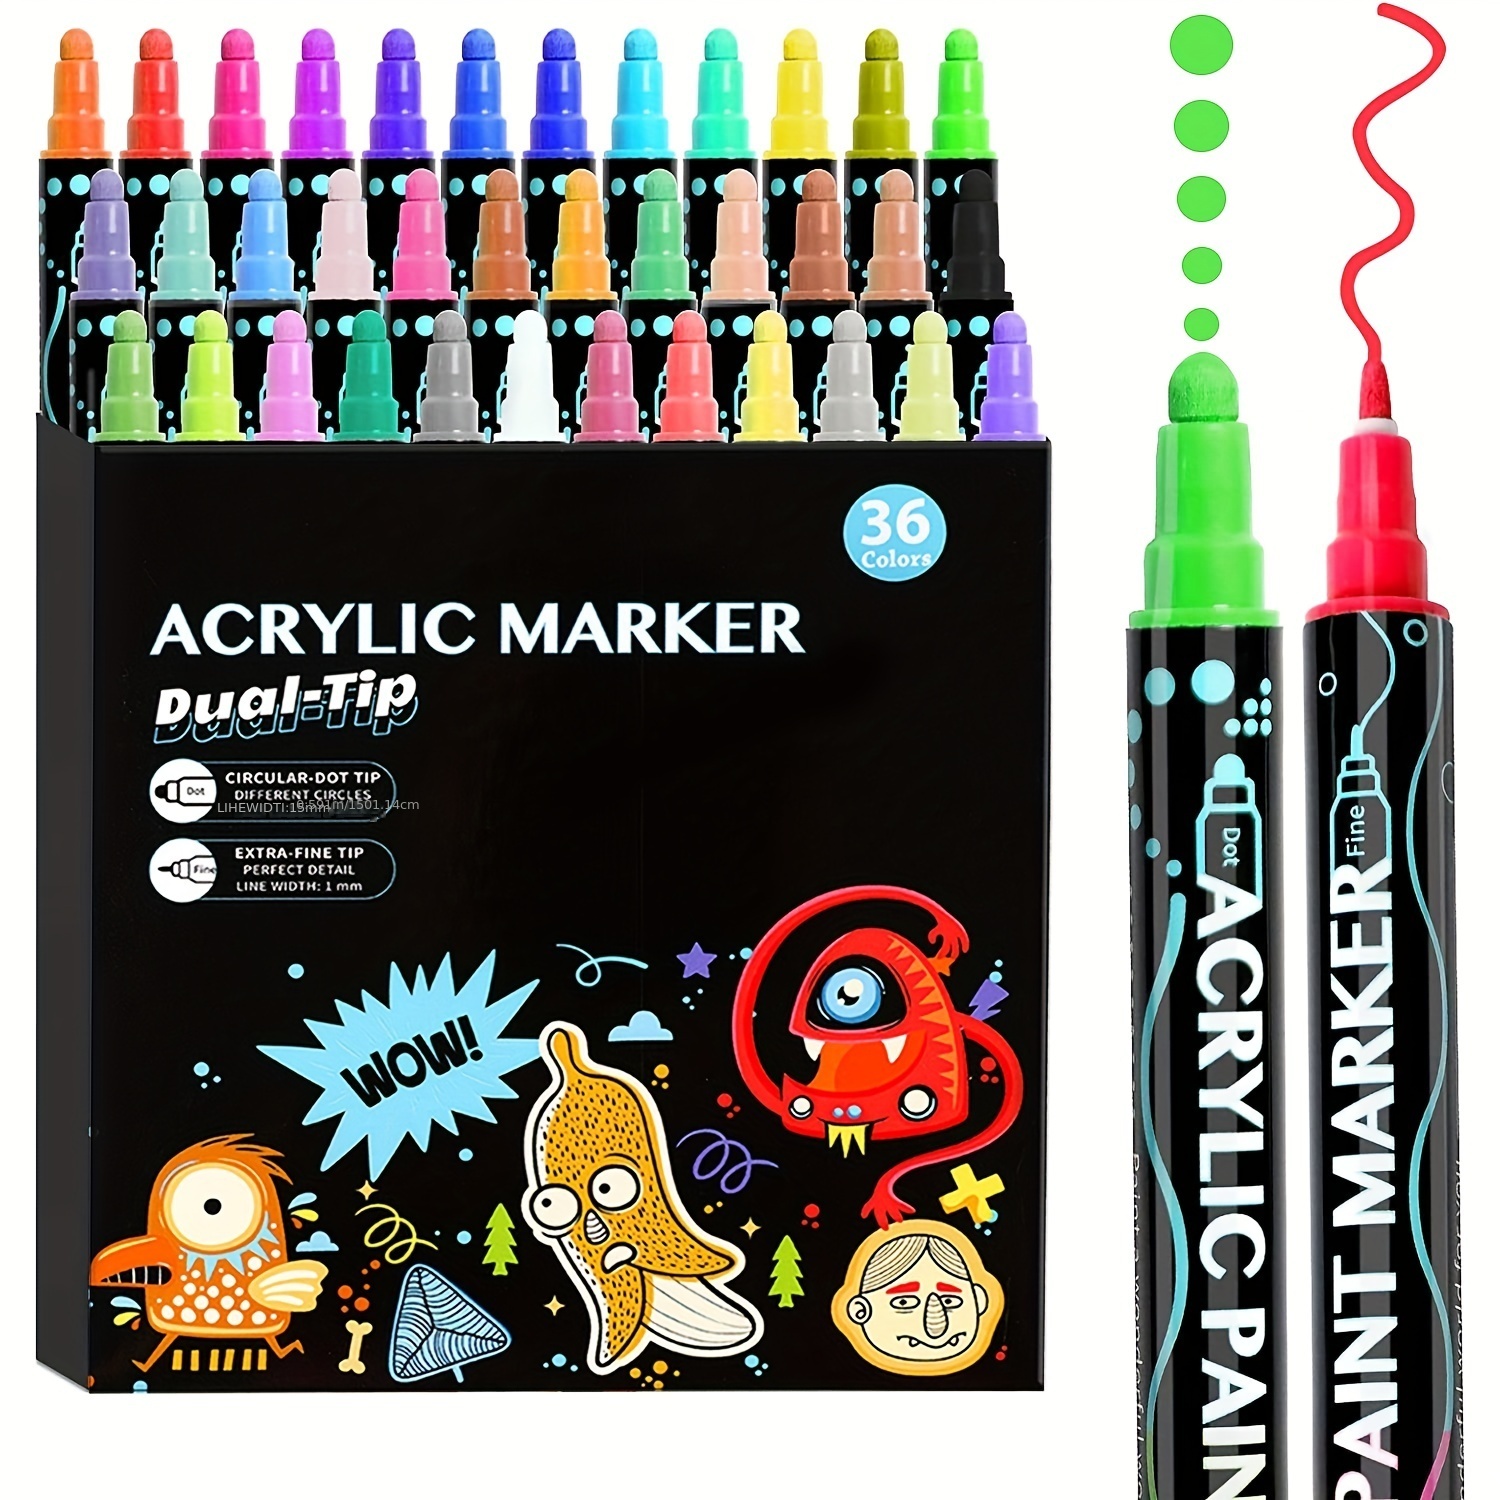 NEON Acrylic Paint Pens 0.7mm EXTRA-FINE Tip: 3-Pack, Your Choice